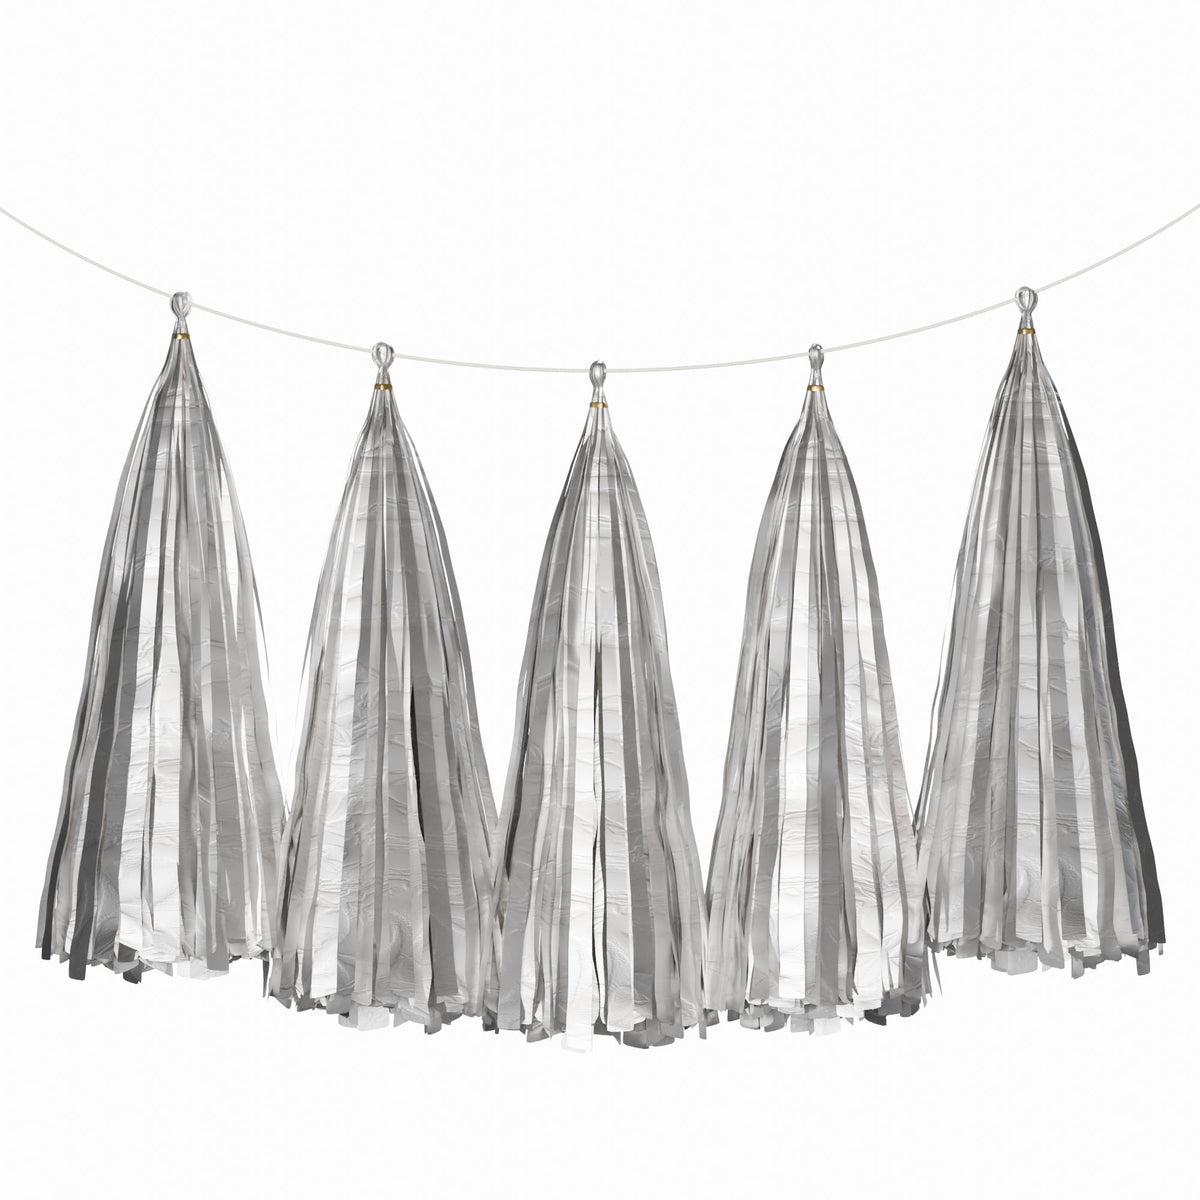 Weifang Mayshine Imp&exp co Decorations Silver Tassel Garland 5 Count 810064197284